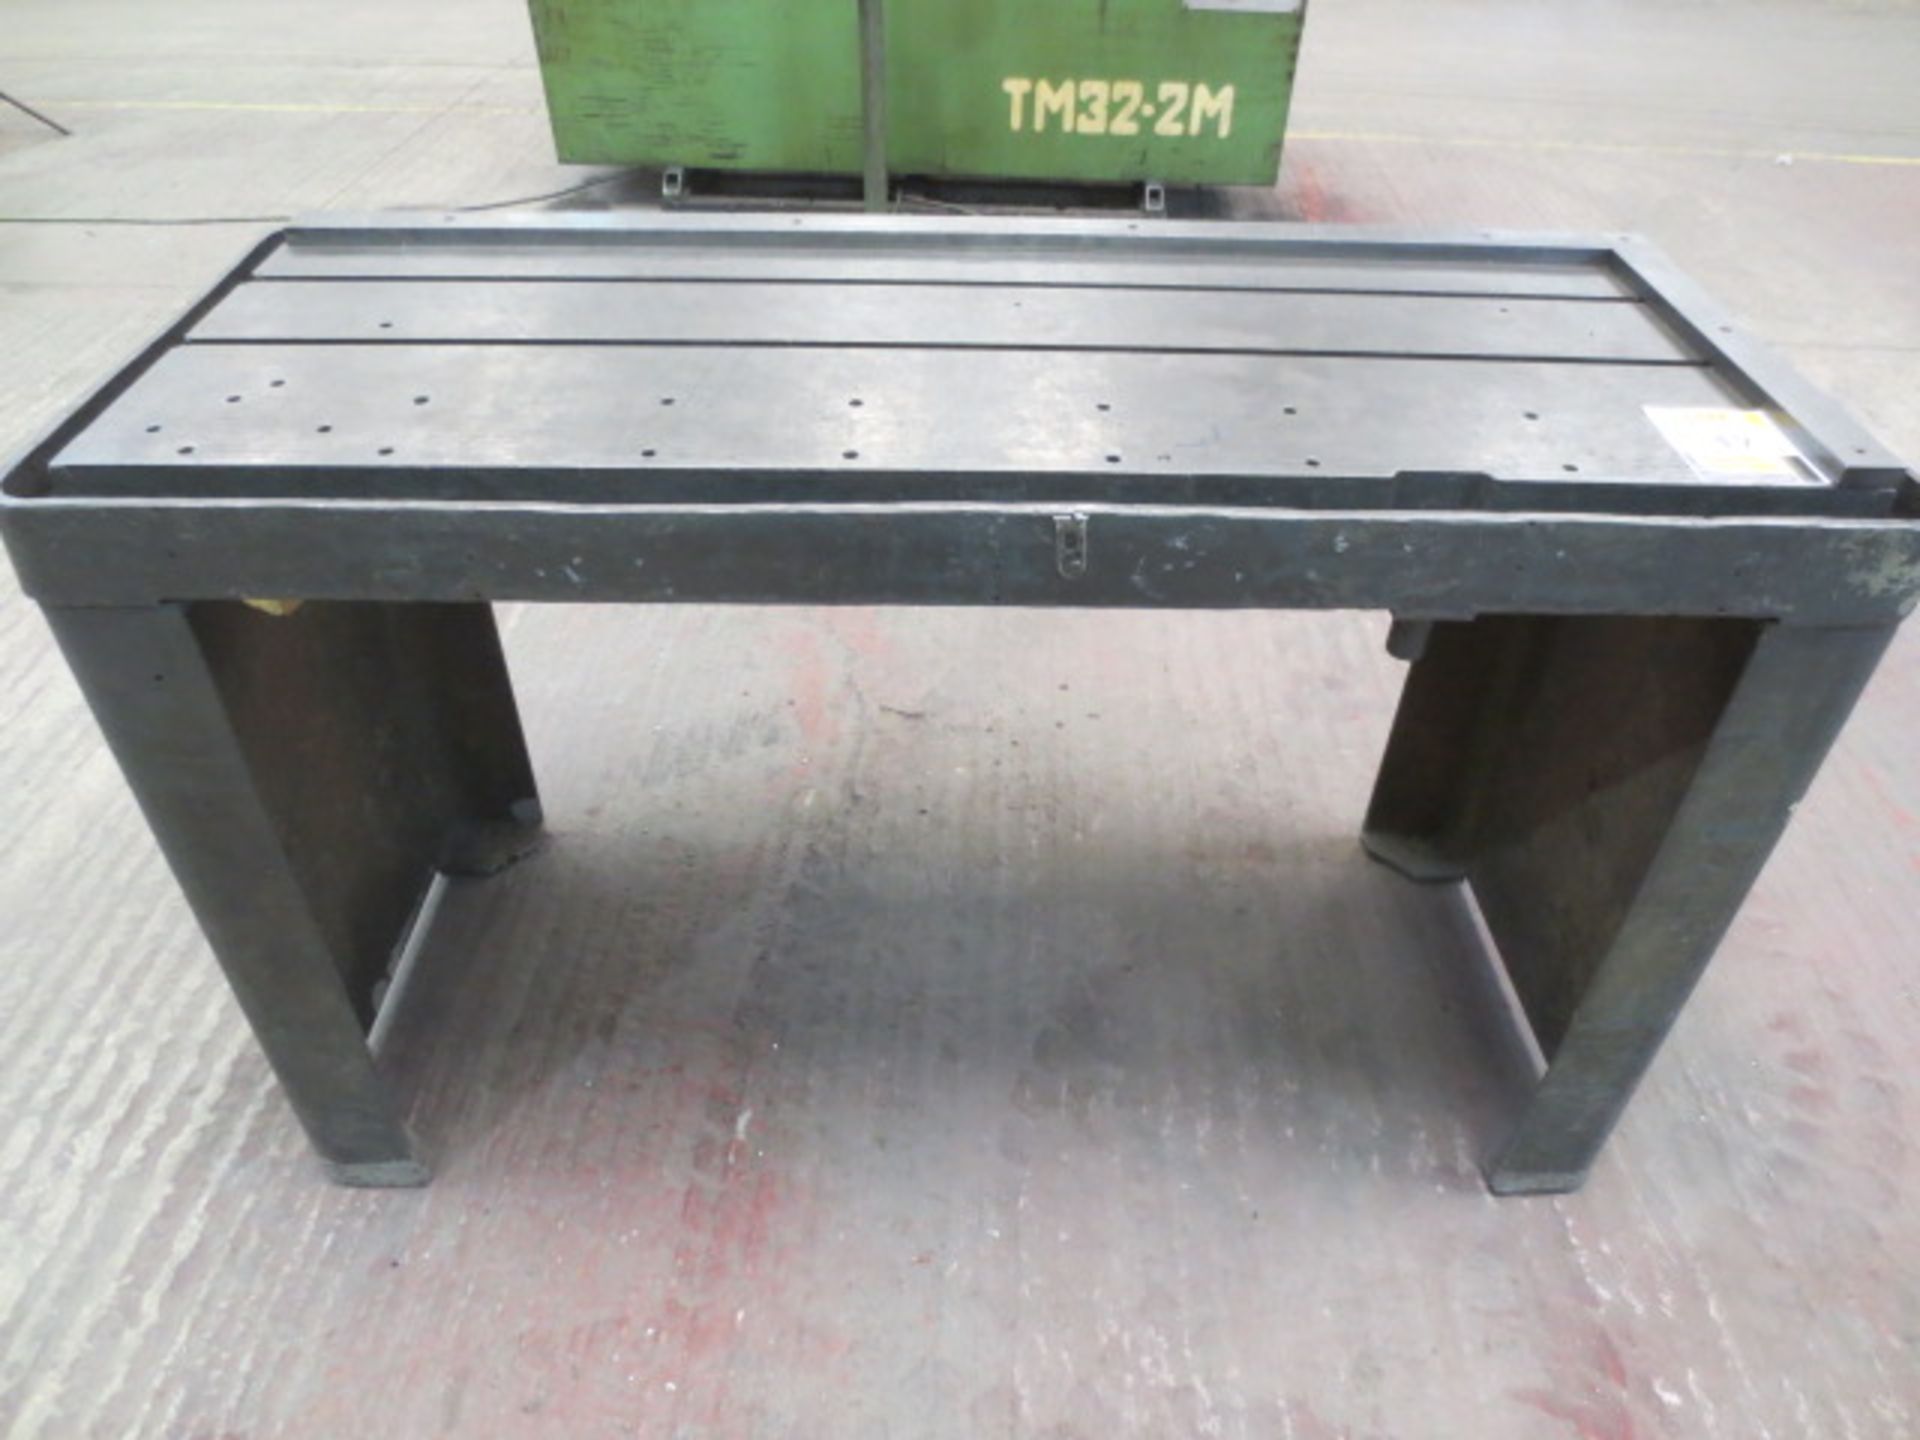 Cast Steel T Slotted table  1600mm x 530mm  (A Work Method Statement and Risk Assessment must be - Image 2 of 2